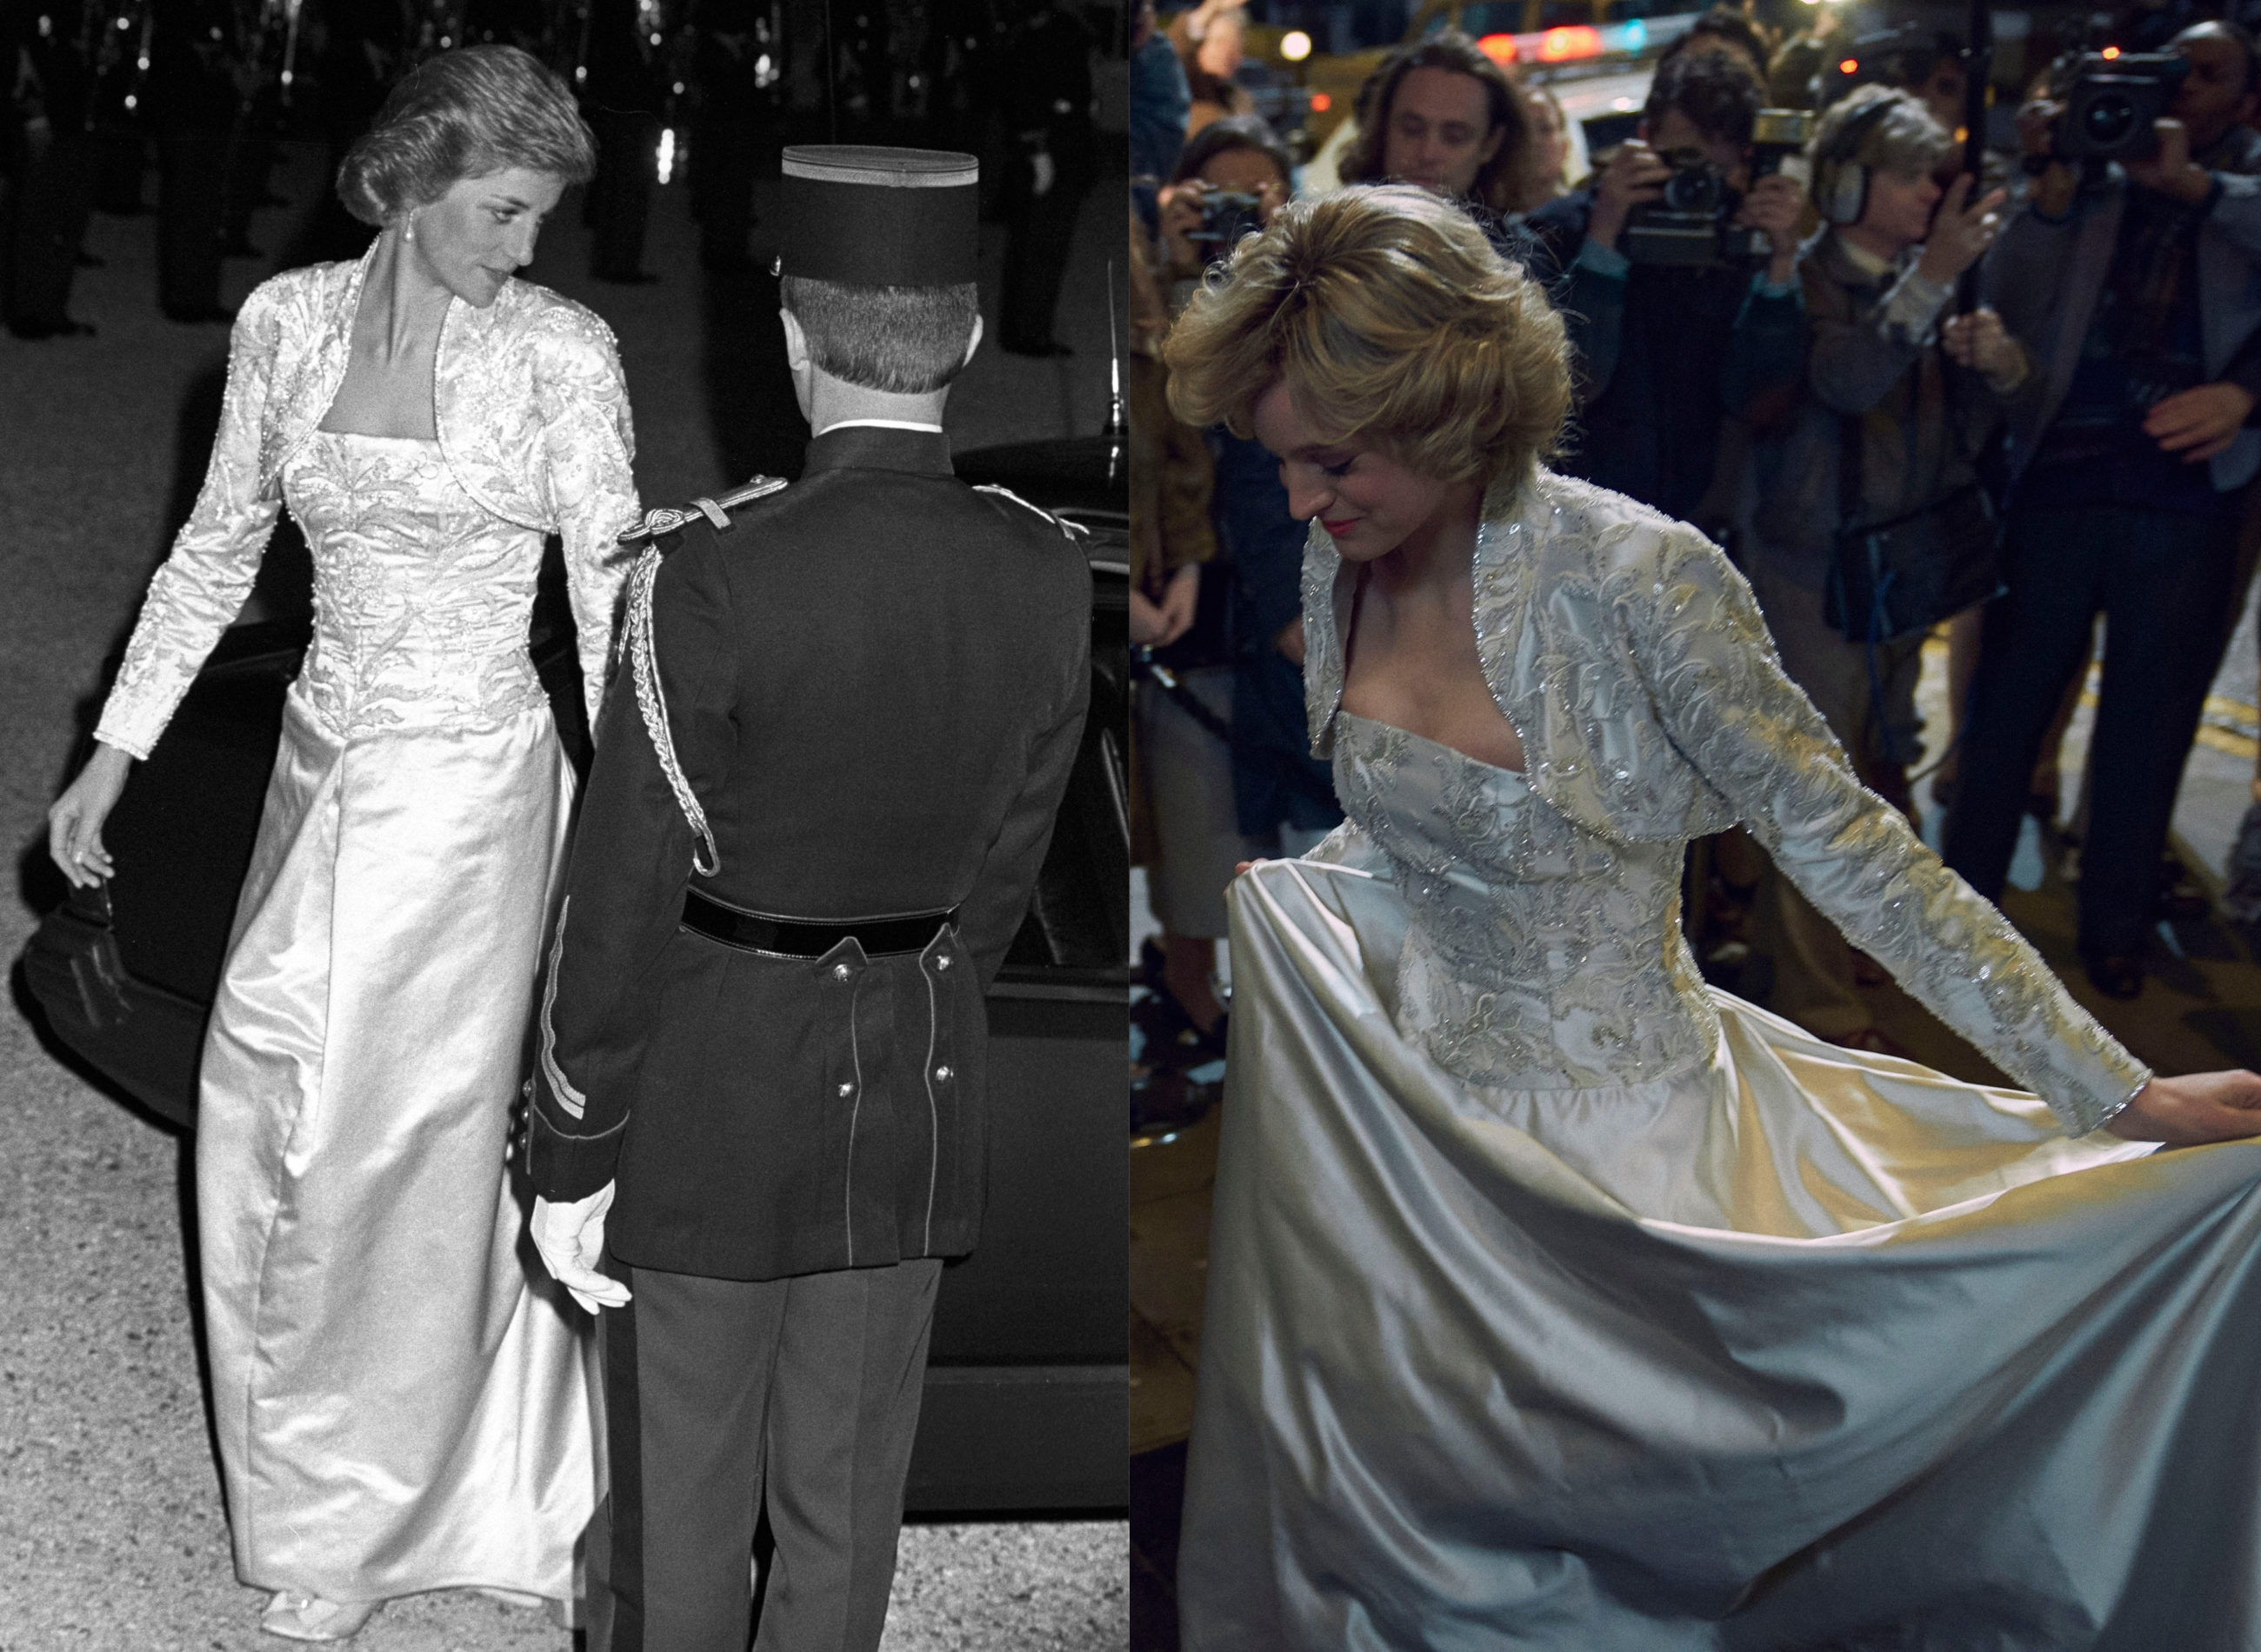 (L) Princess Diana at the Elysee Palace in 1988 and (R) wearing a copy of the dress in The Crown